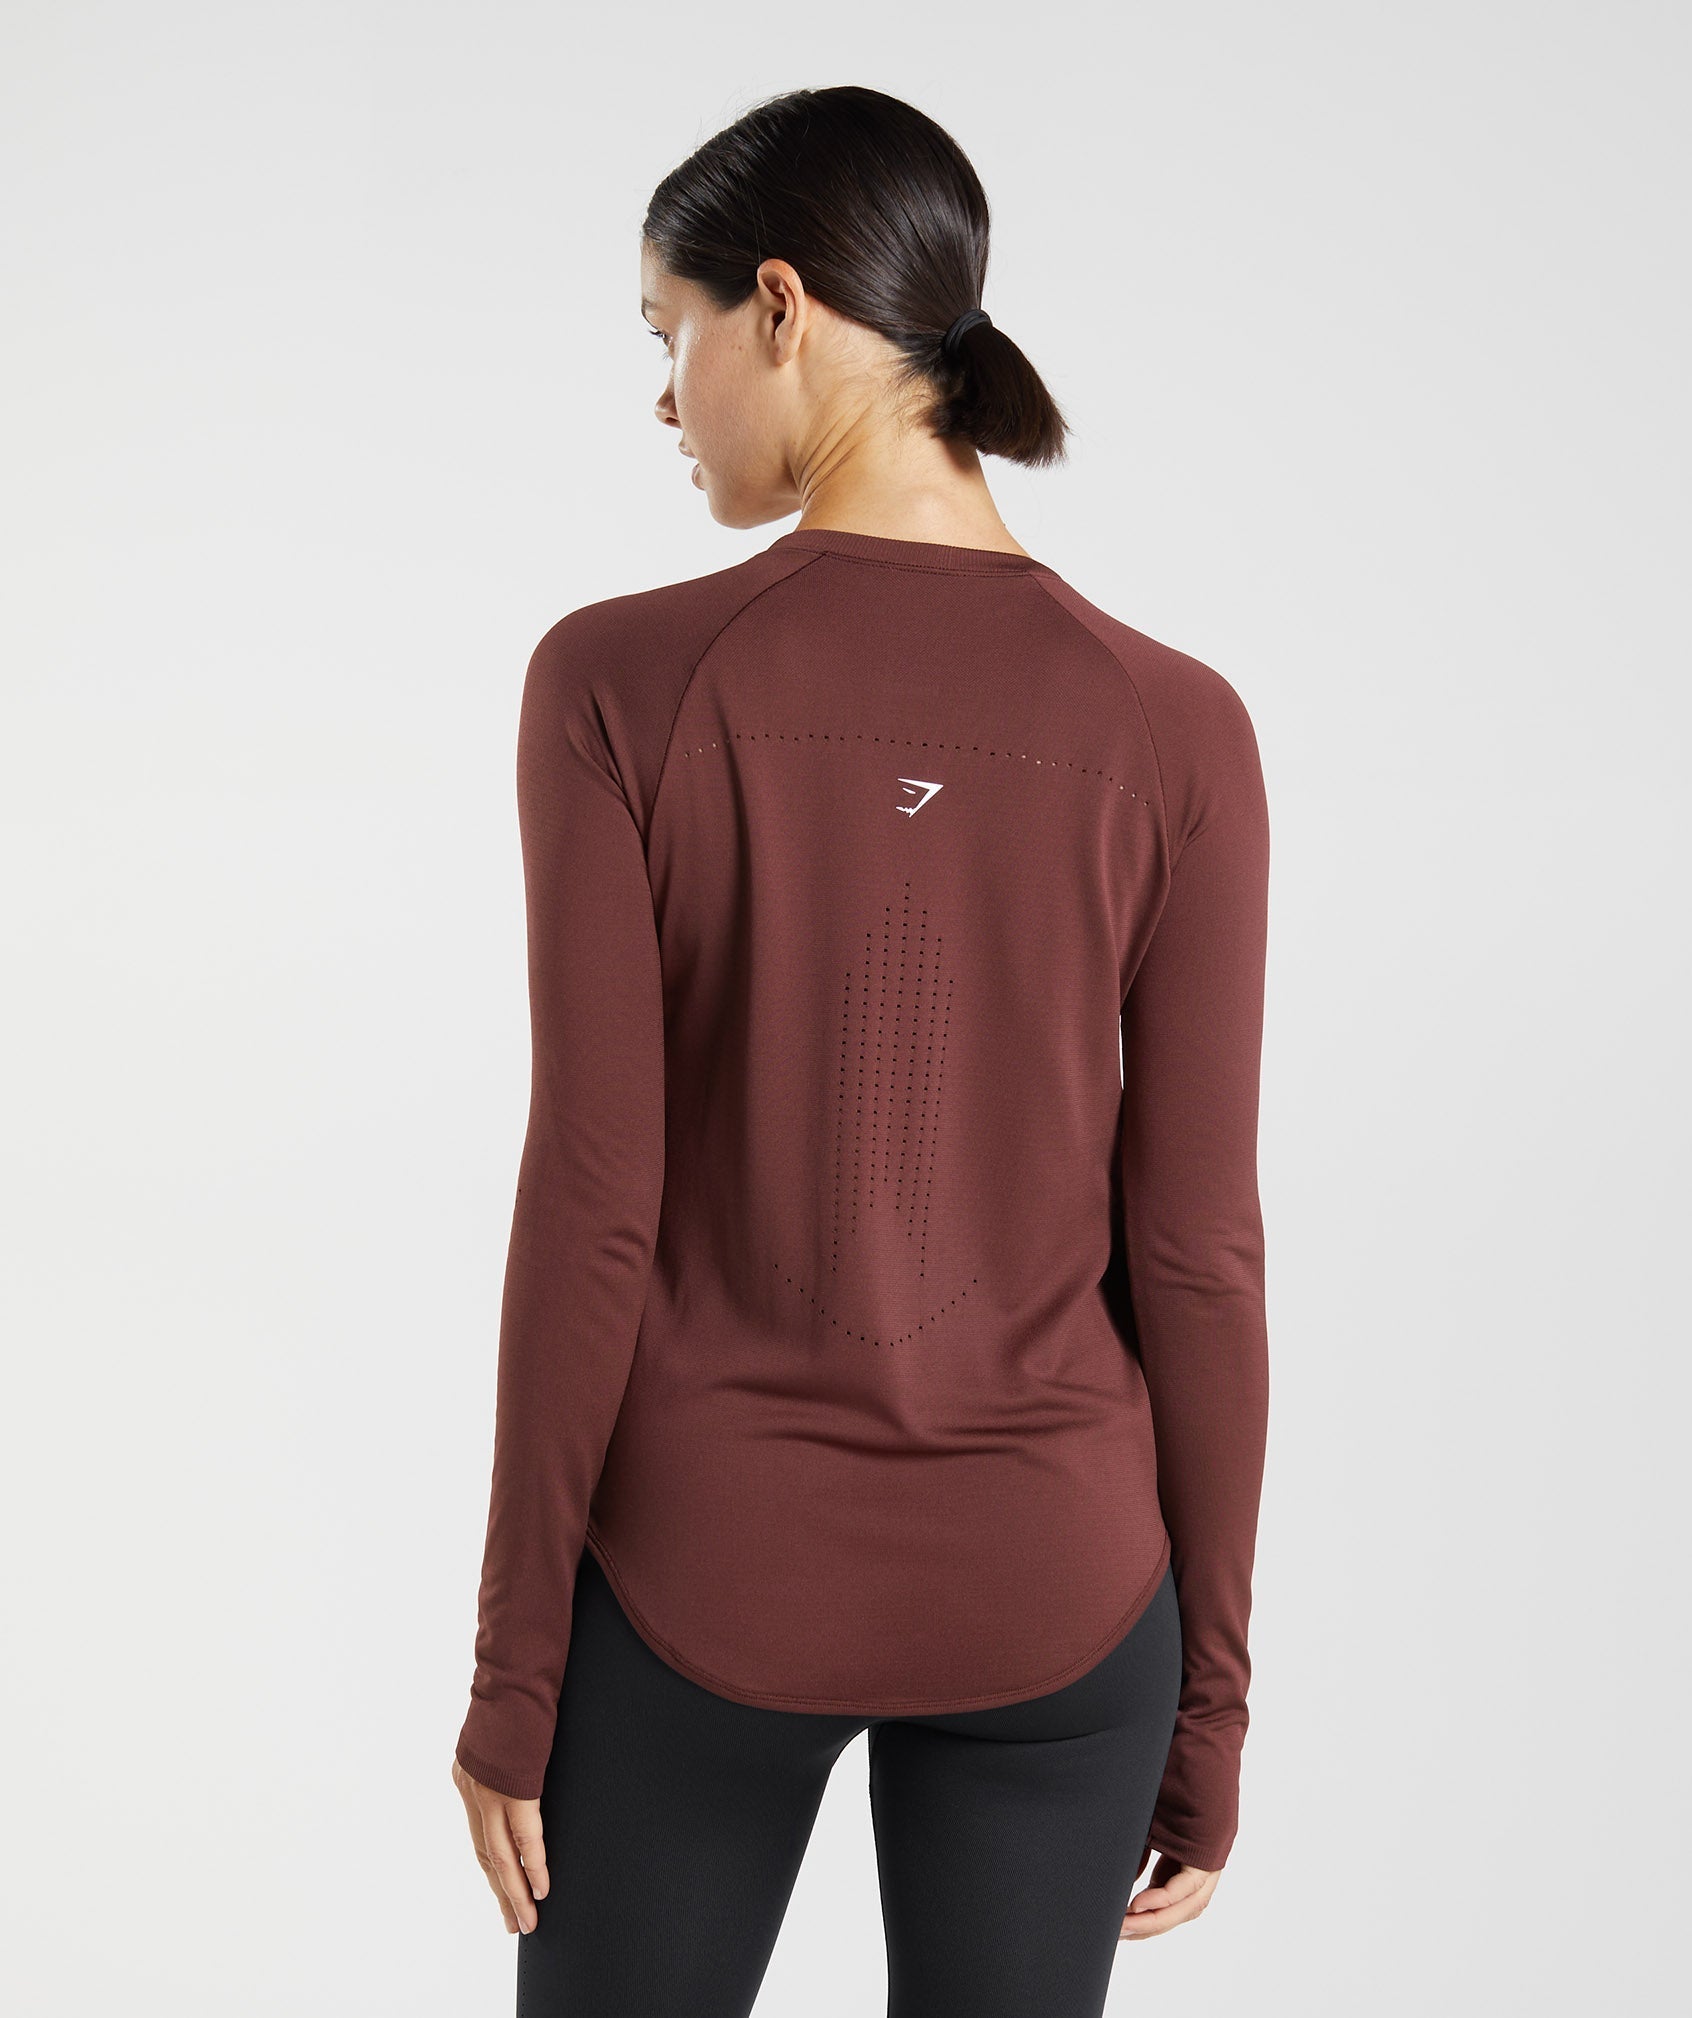 Sweat Seamless Long Sleeve Top in Baked Maroon - view 2